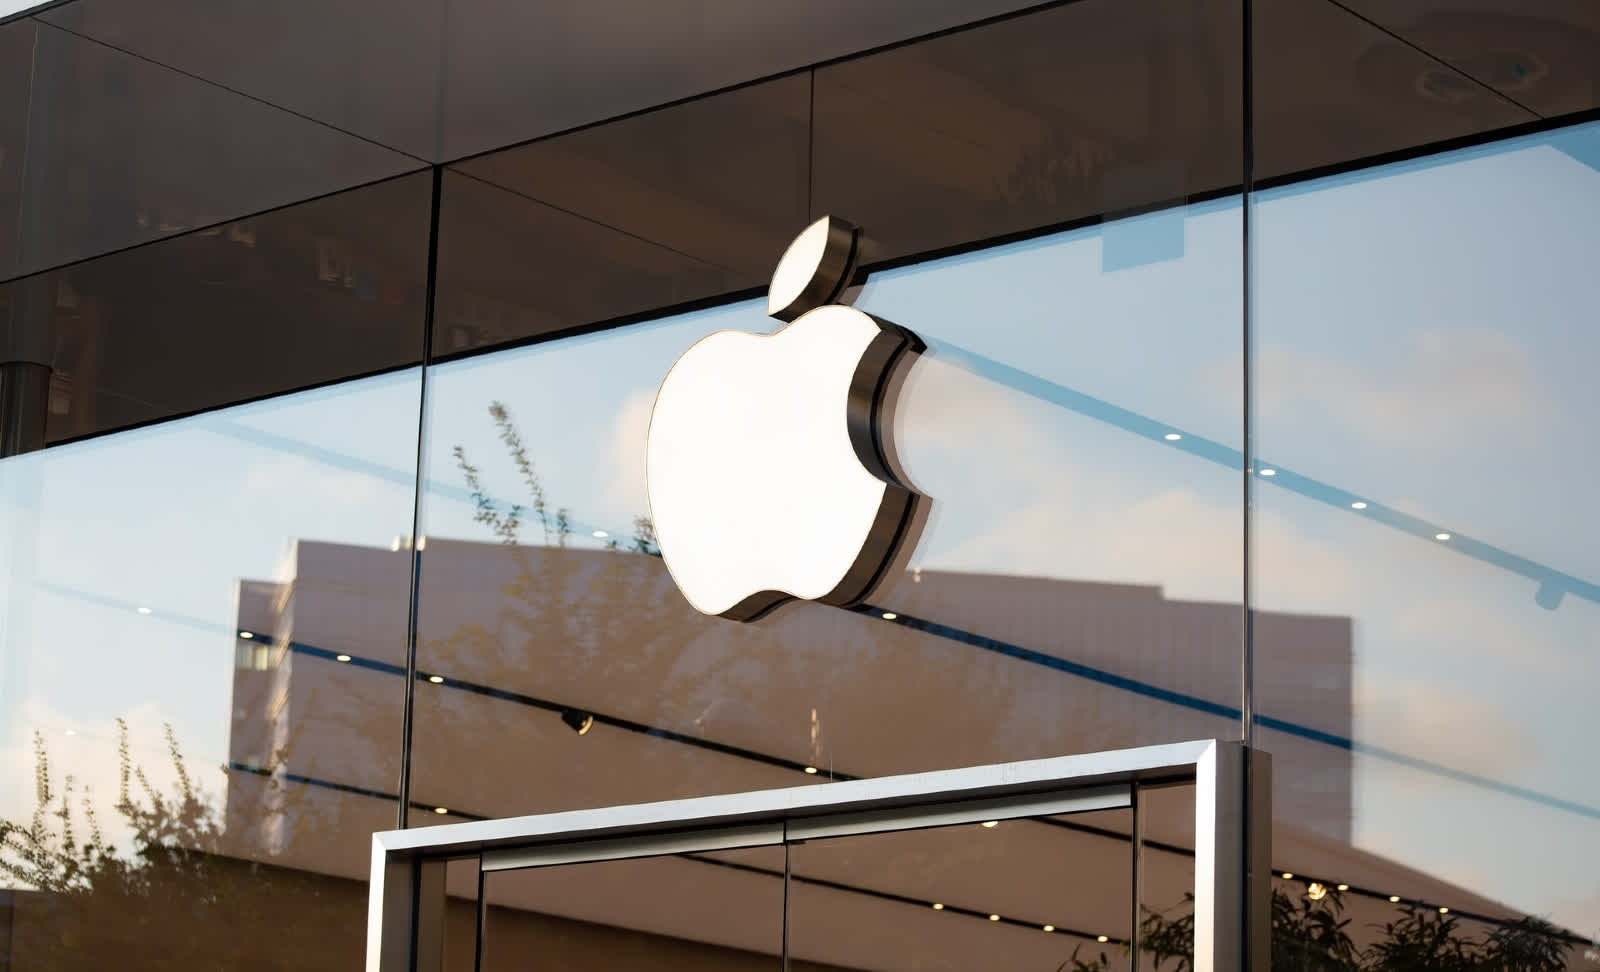 The Netherlands has fined Apple five times over app store payments